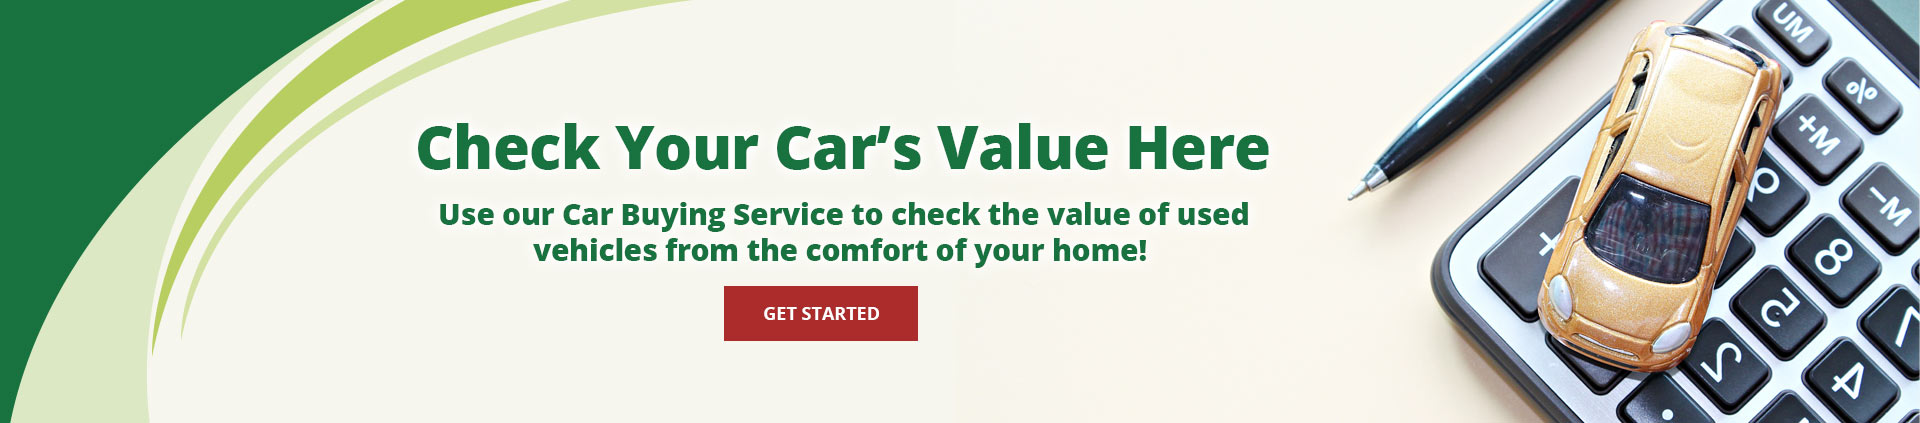 Check Your Car’s Value Here
Use our Car Buying Service to check the value of used vehicles from the comfort of your home!
Get Started